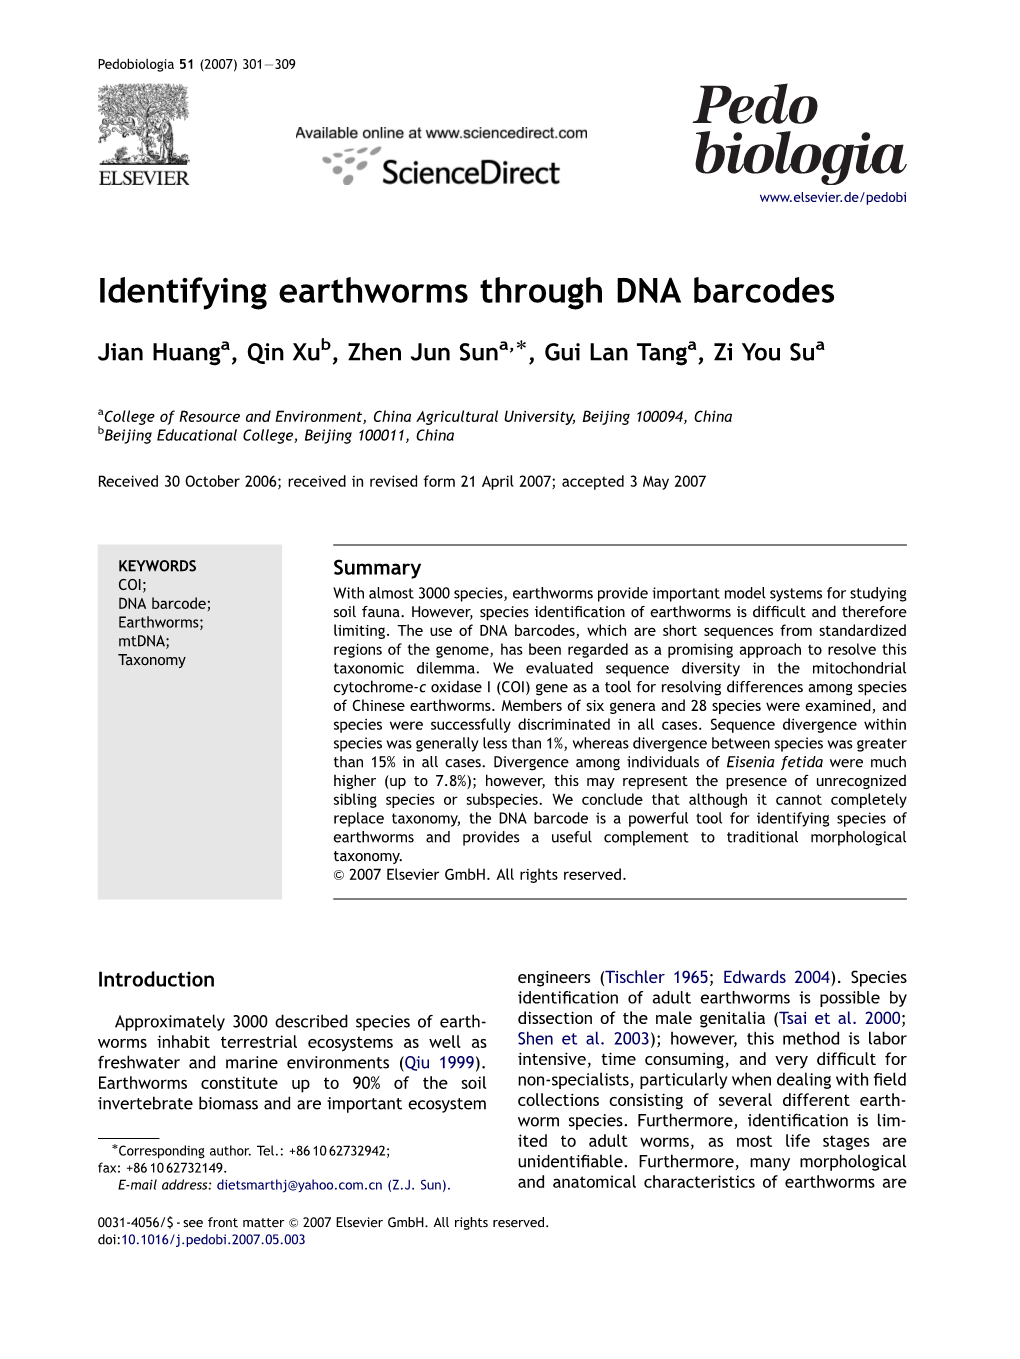 Identifying Earthworms Through DNA Barcodes